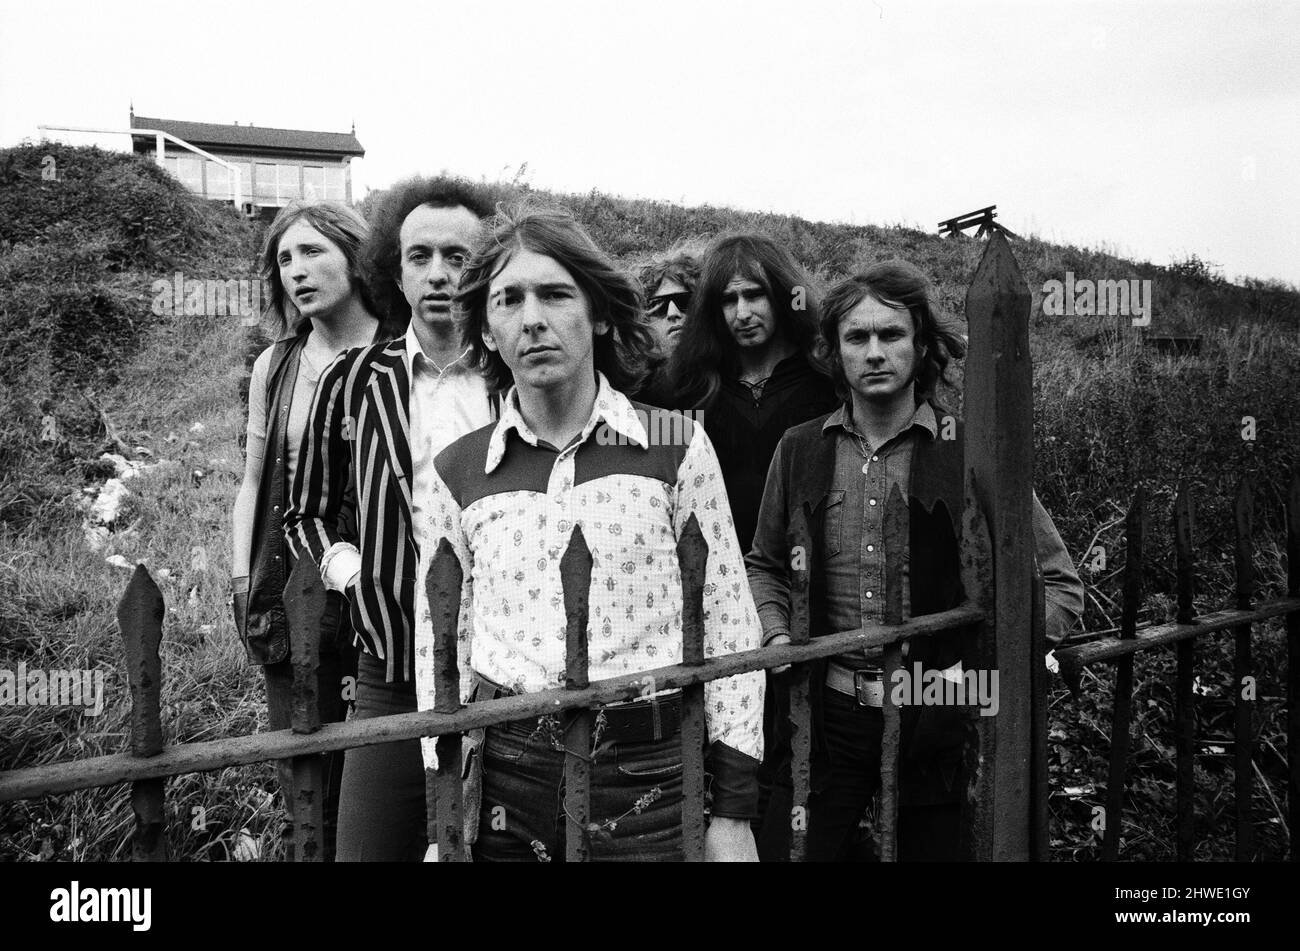 Mott the Hoople pop group, band members are Verden Allen, Buffin (Dale Griffin), Mick Ralphs, Overend Watts, Ian Hunter and Guy Stevens. 17th September 1970. Stock Photo